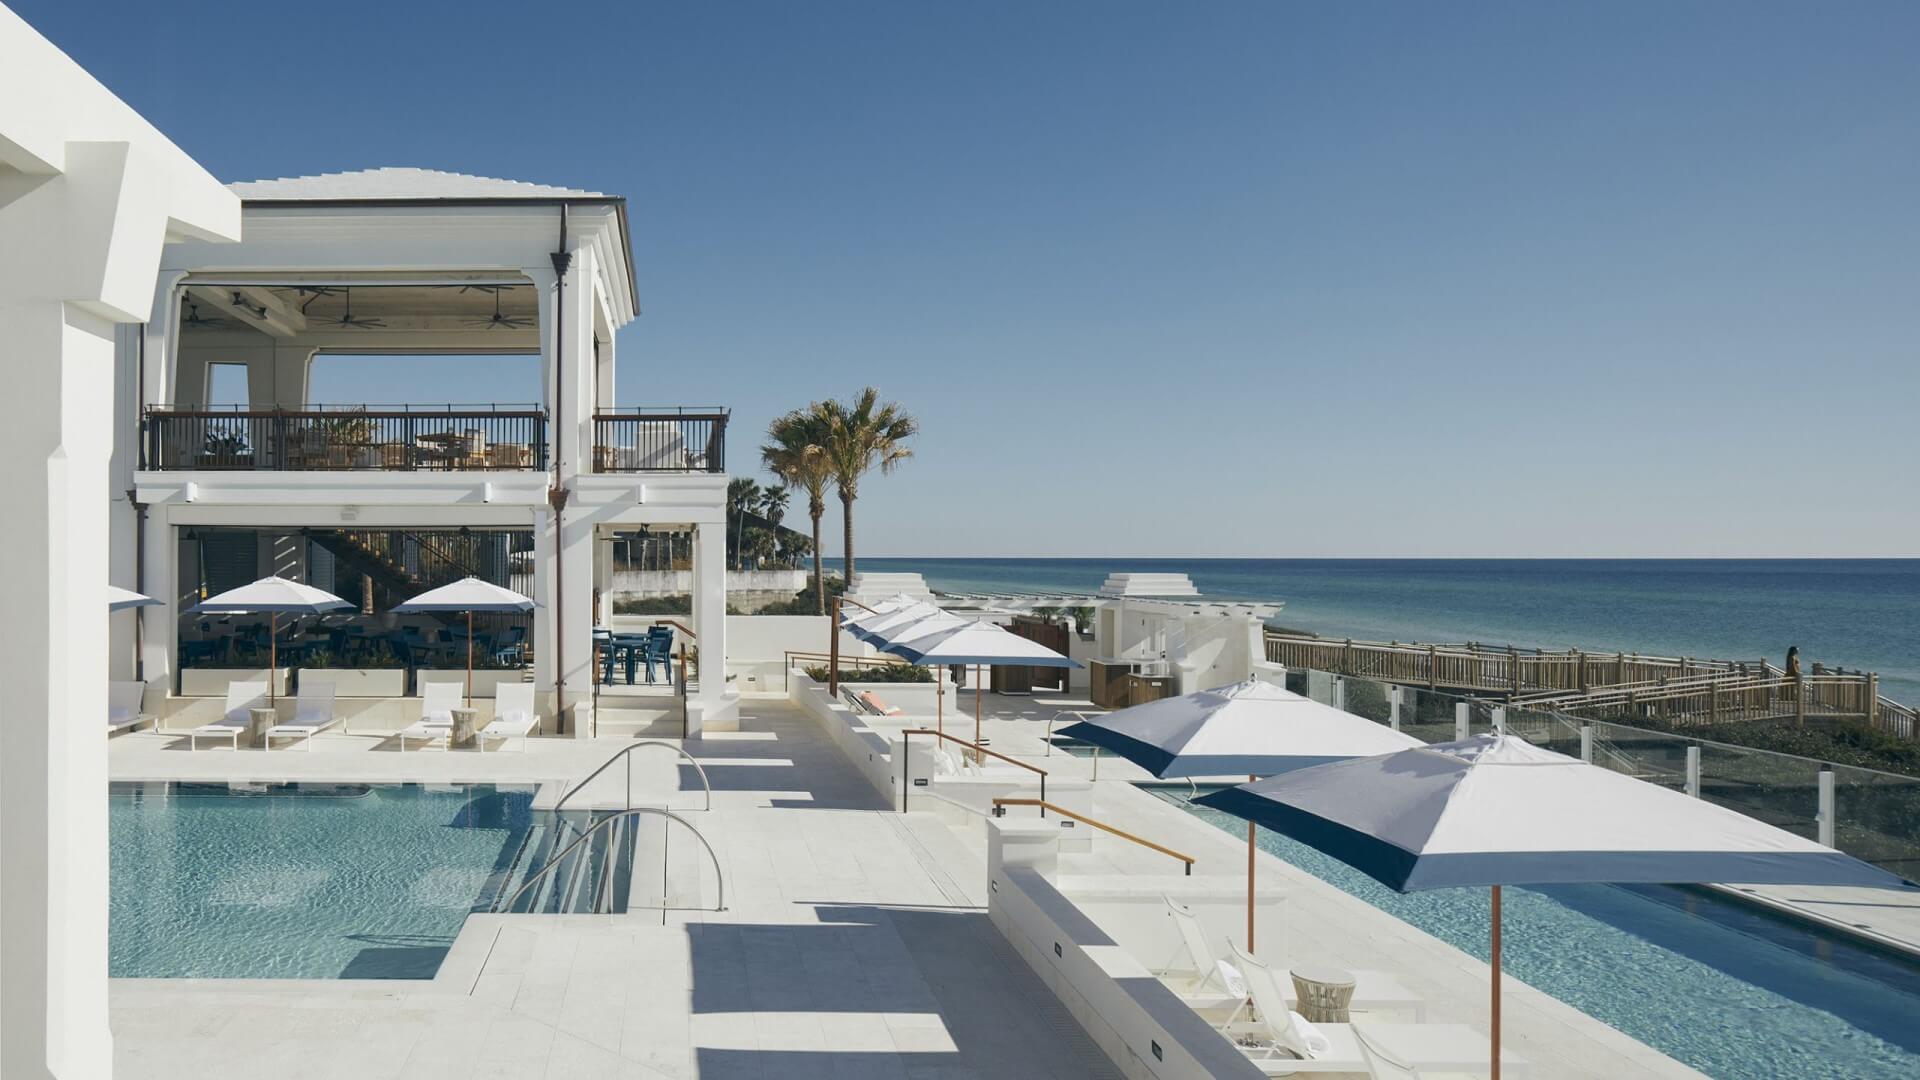 Alys Beach Club pool spans two levels with hot tubs below.